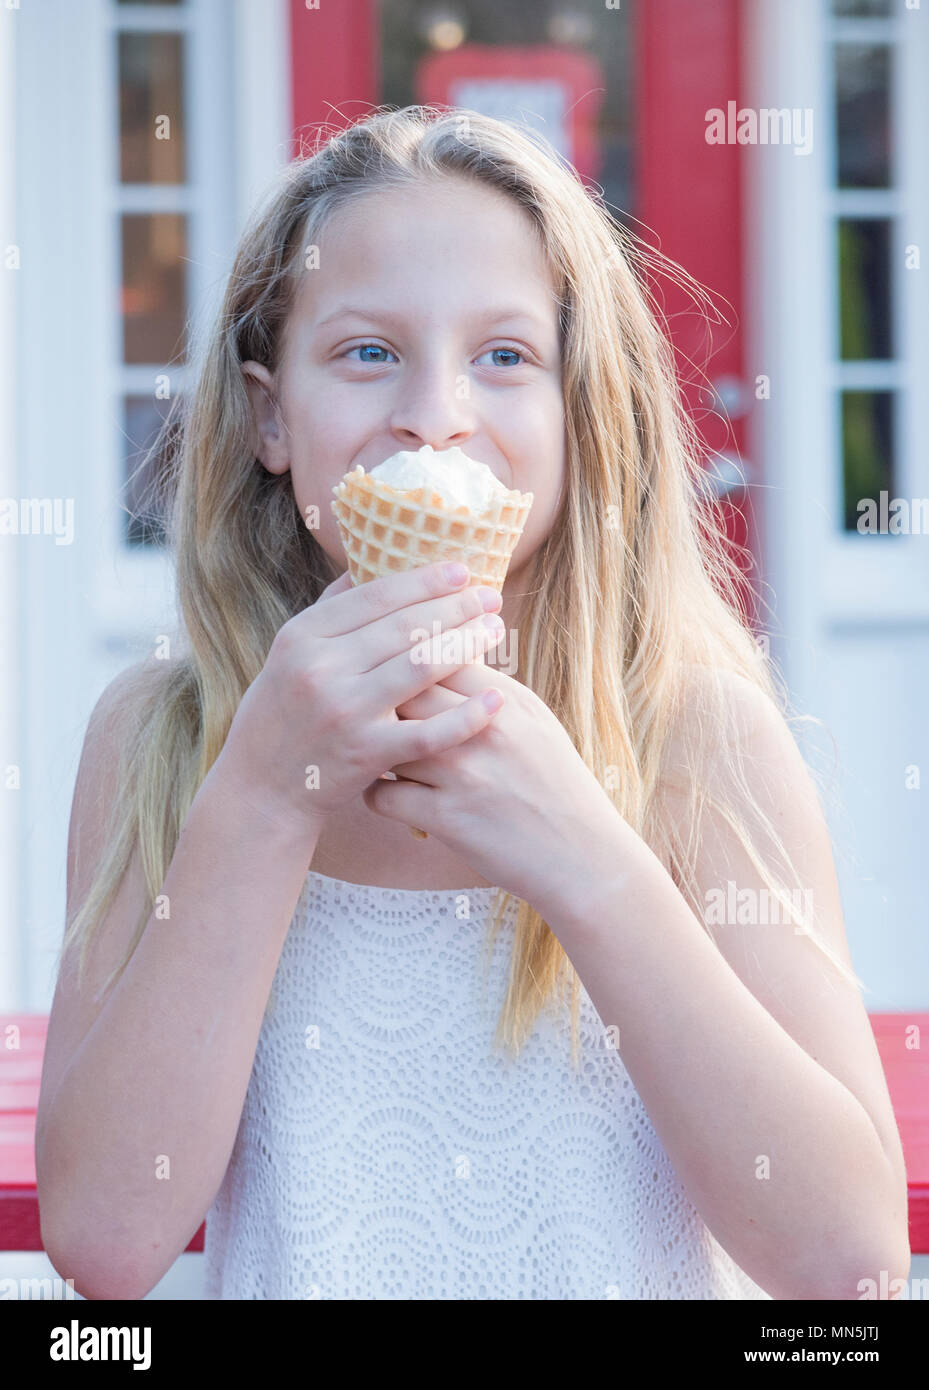 10 year old girl with long blond hair enjoying an ice cream cone.  Image is from the waist up. Stock Photo